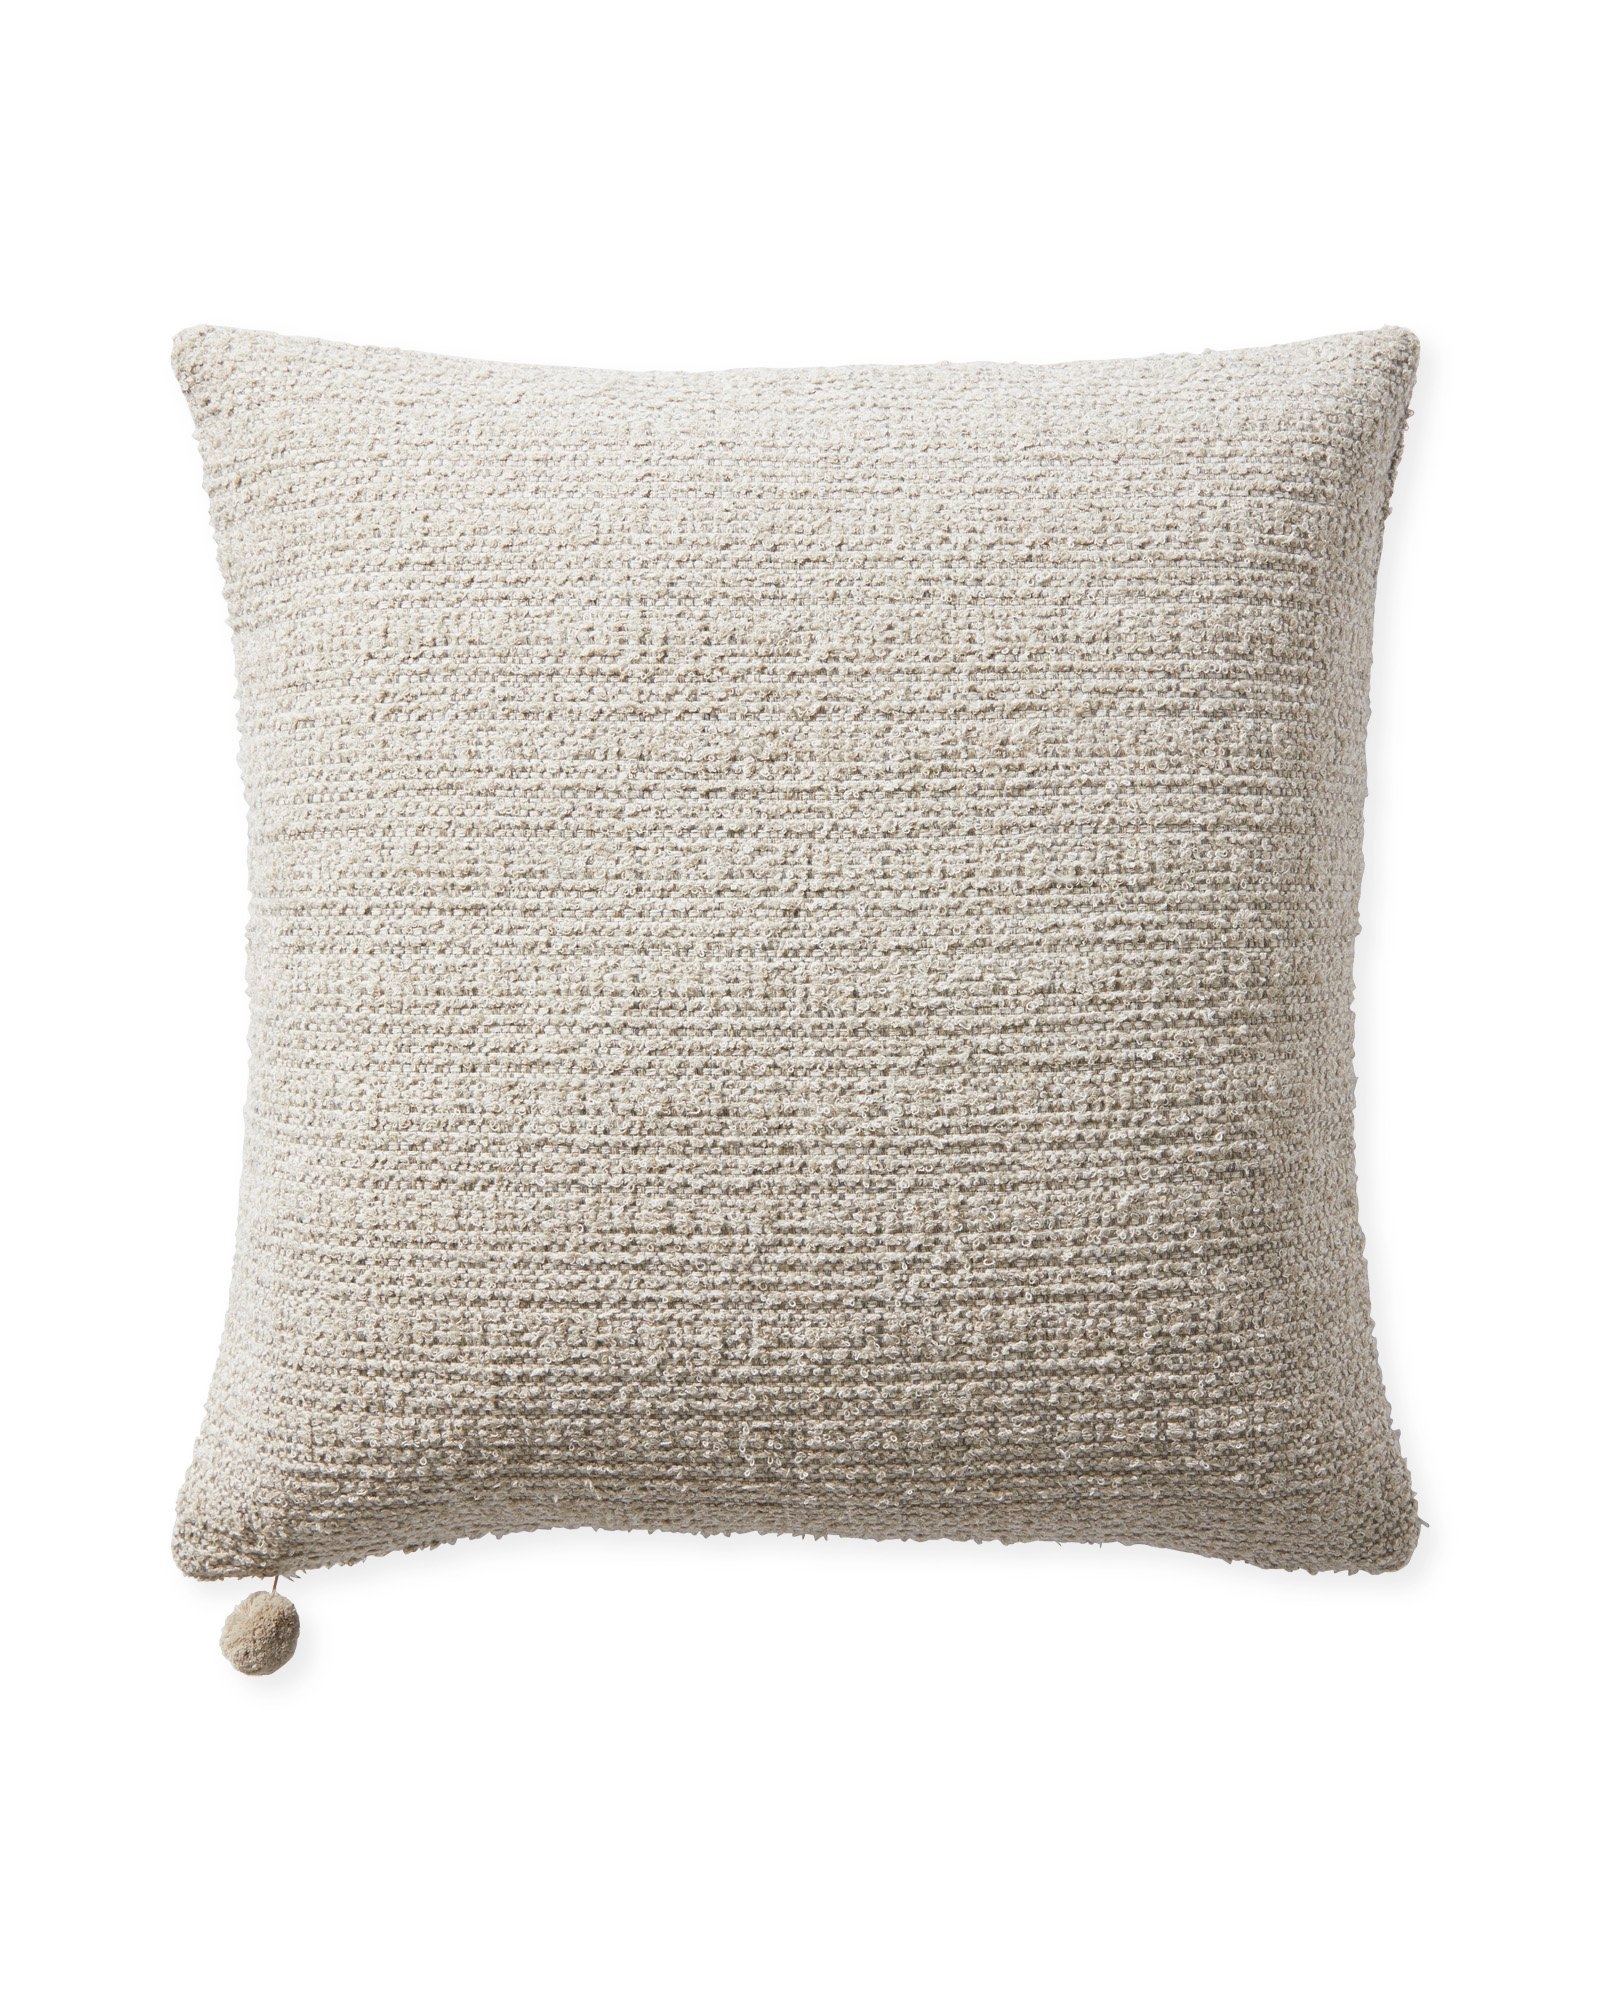 Perennials Performance Textured Loop 22" SQ Pillow Cover - Sand - Insert sold separately - Image 0